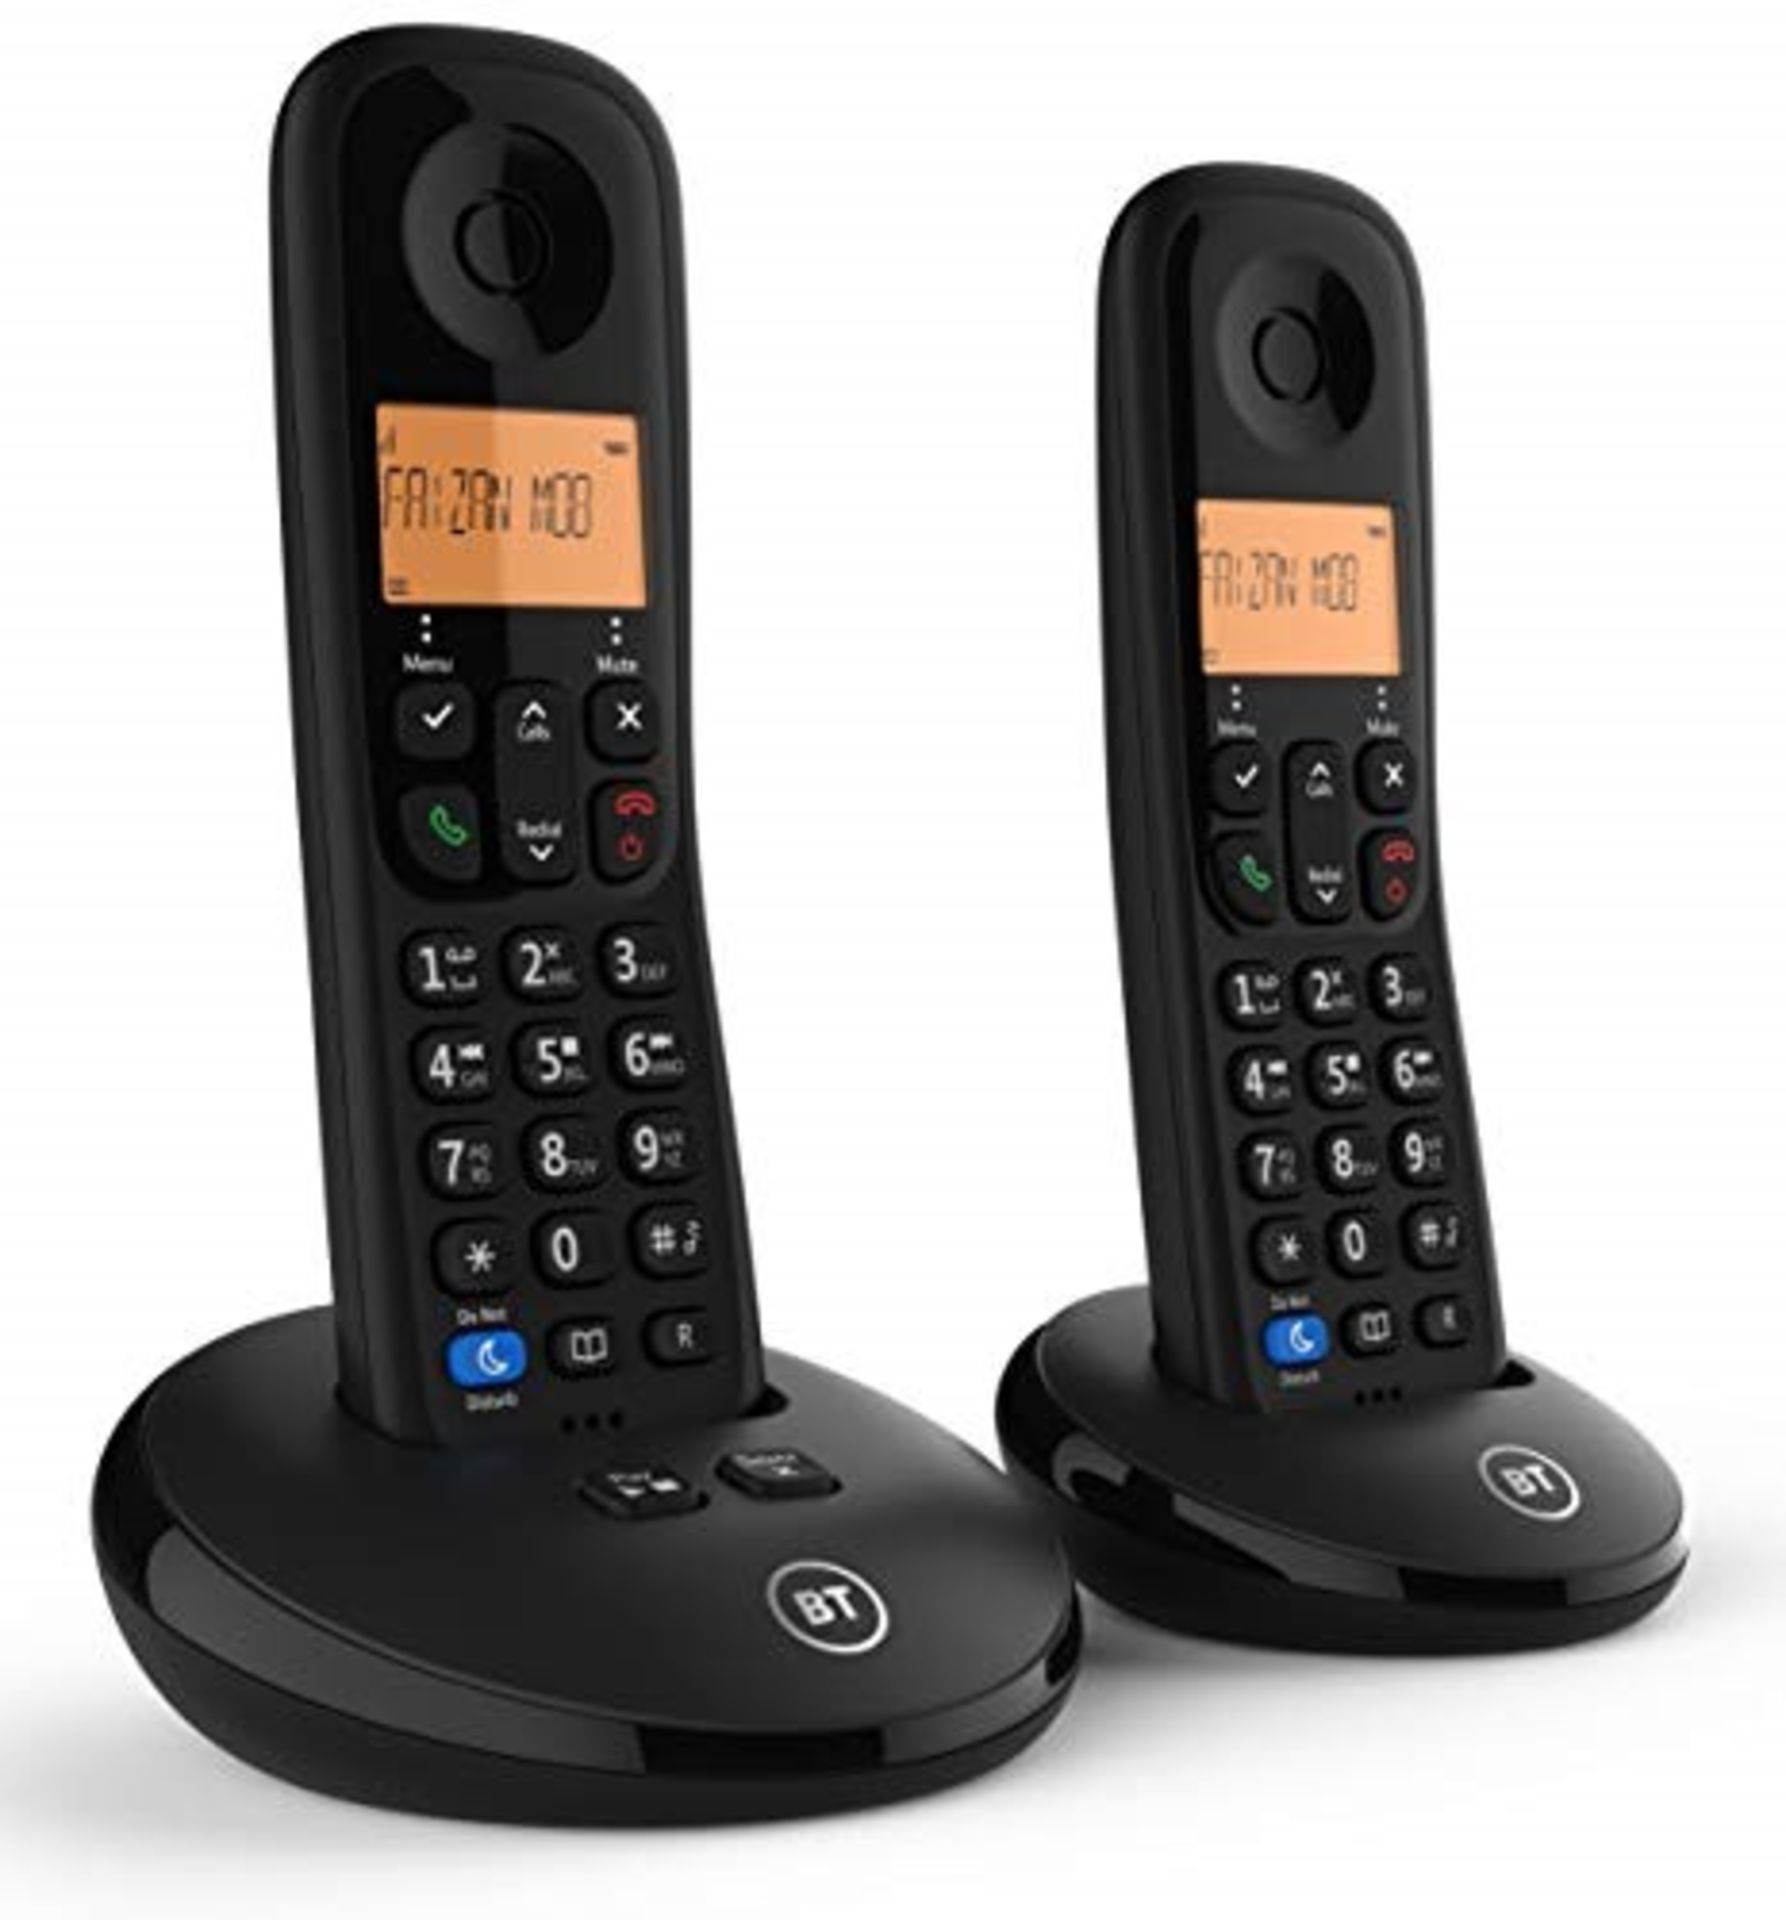 BT Everyday Cordless Home Phone with Basic Call